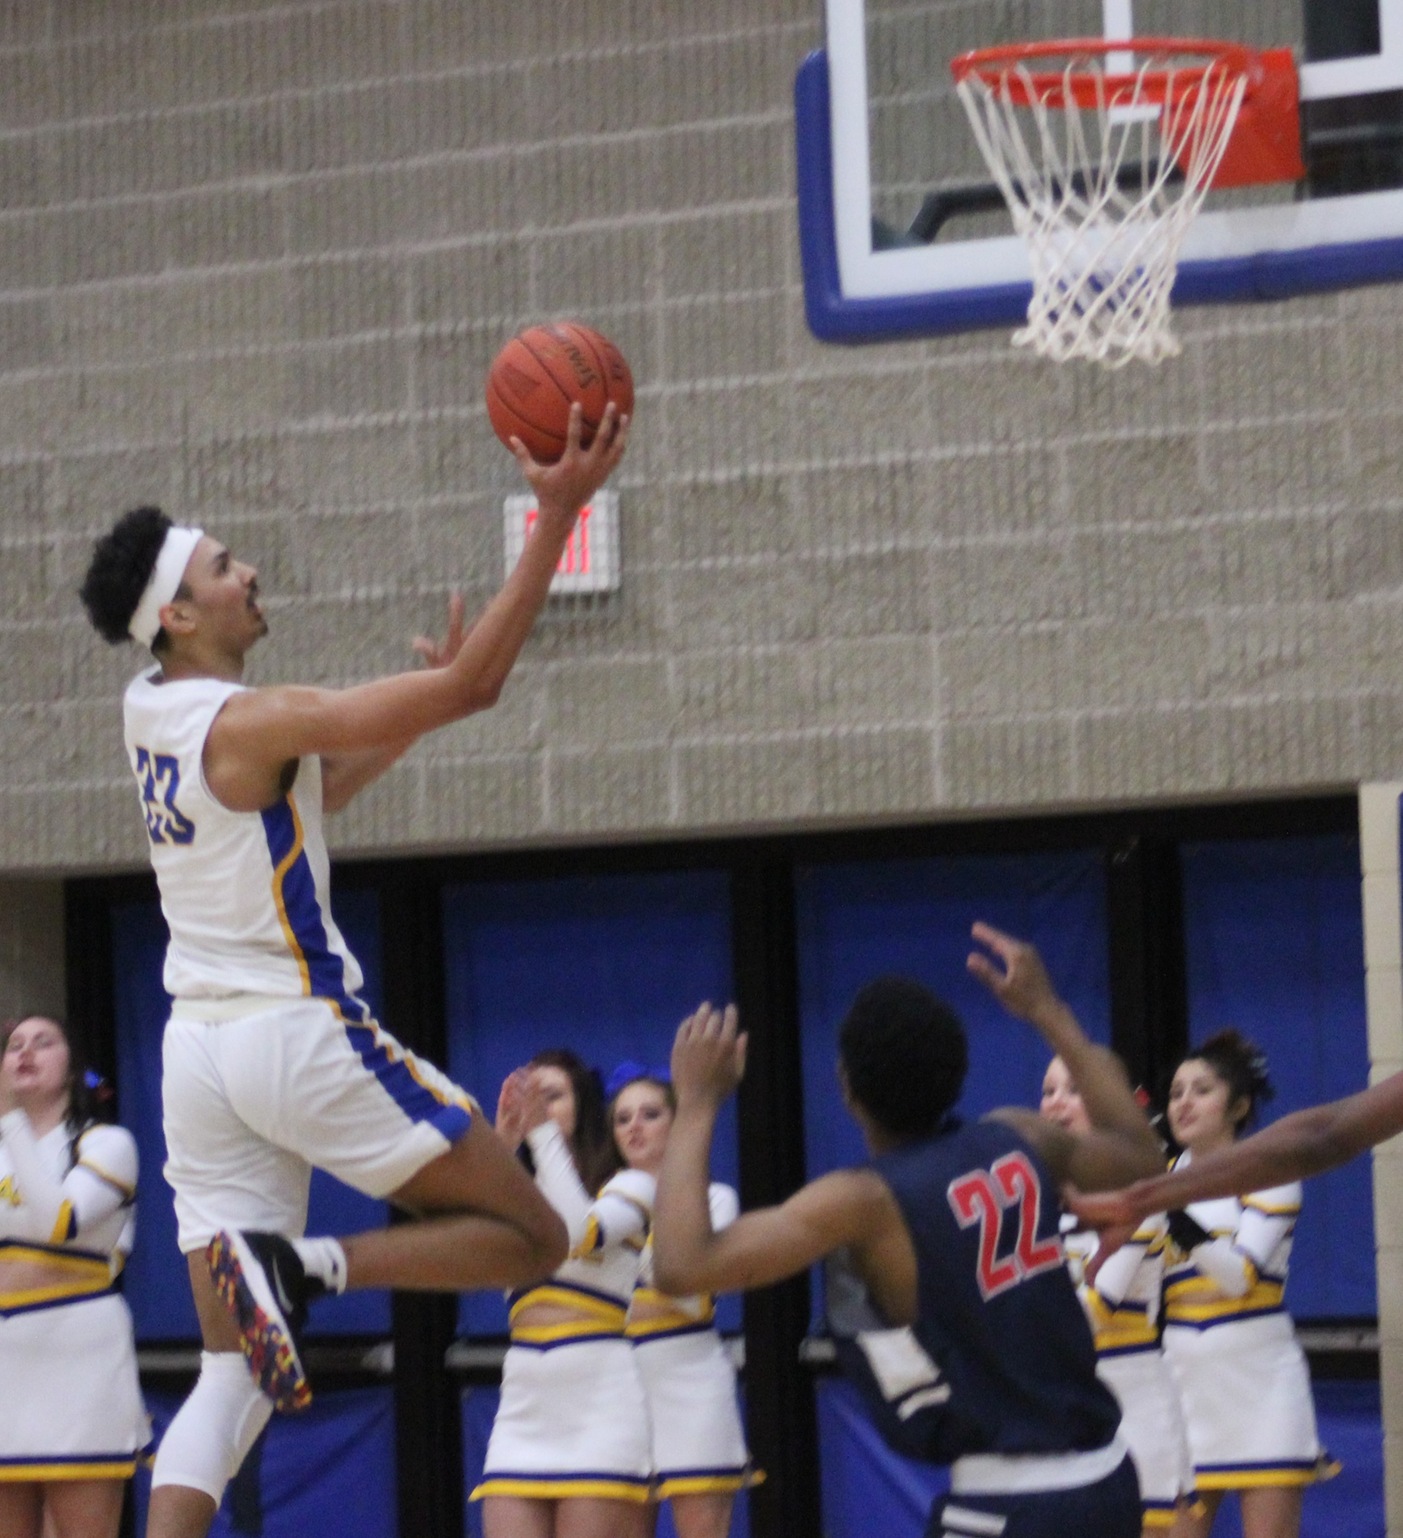 Trey Sampson scores 2 of his 23 points in second half of Saturday's game against Southwestern.